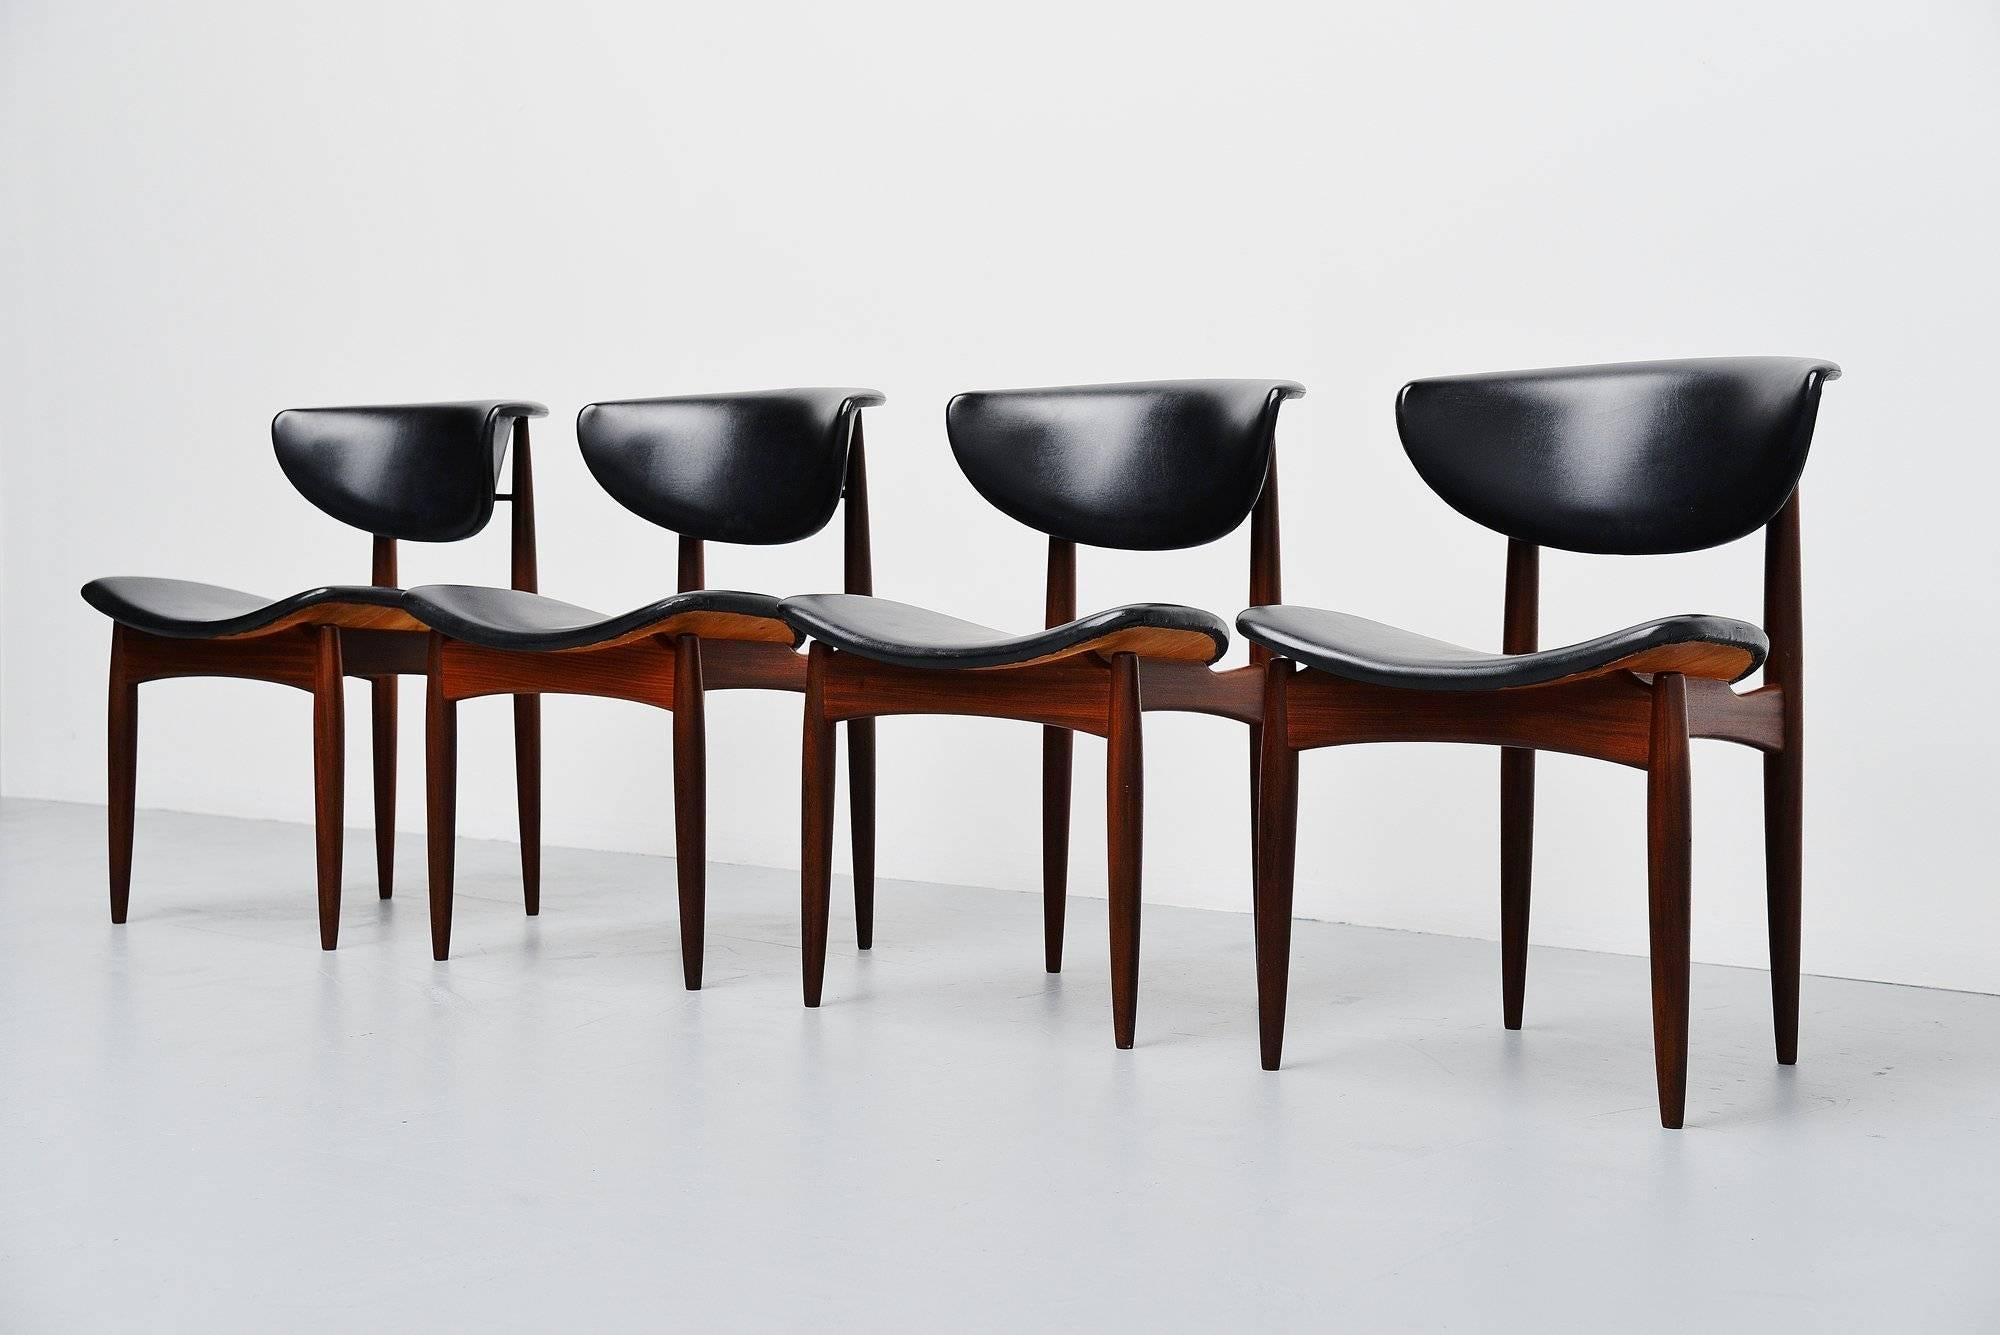 Scandinavian Modern Danish Dining Chairs in Teak and Faux Leather, Denmark, 1960